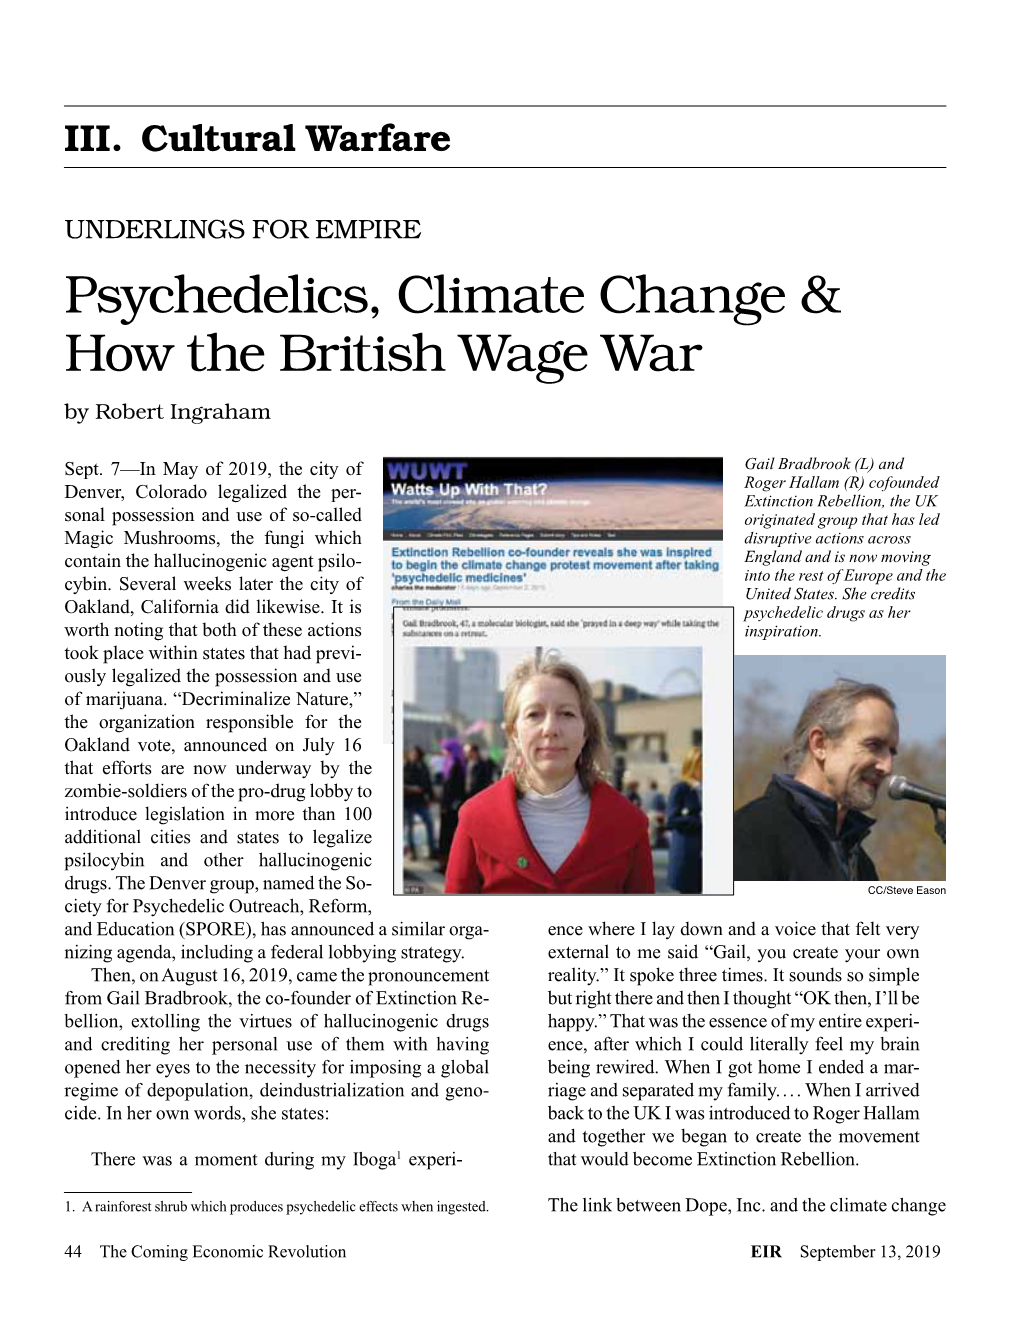 Psychedelics, Climate Change & How the British Wage